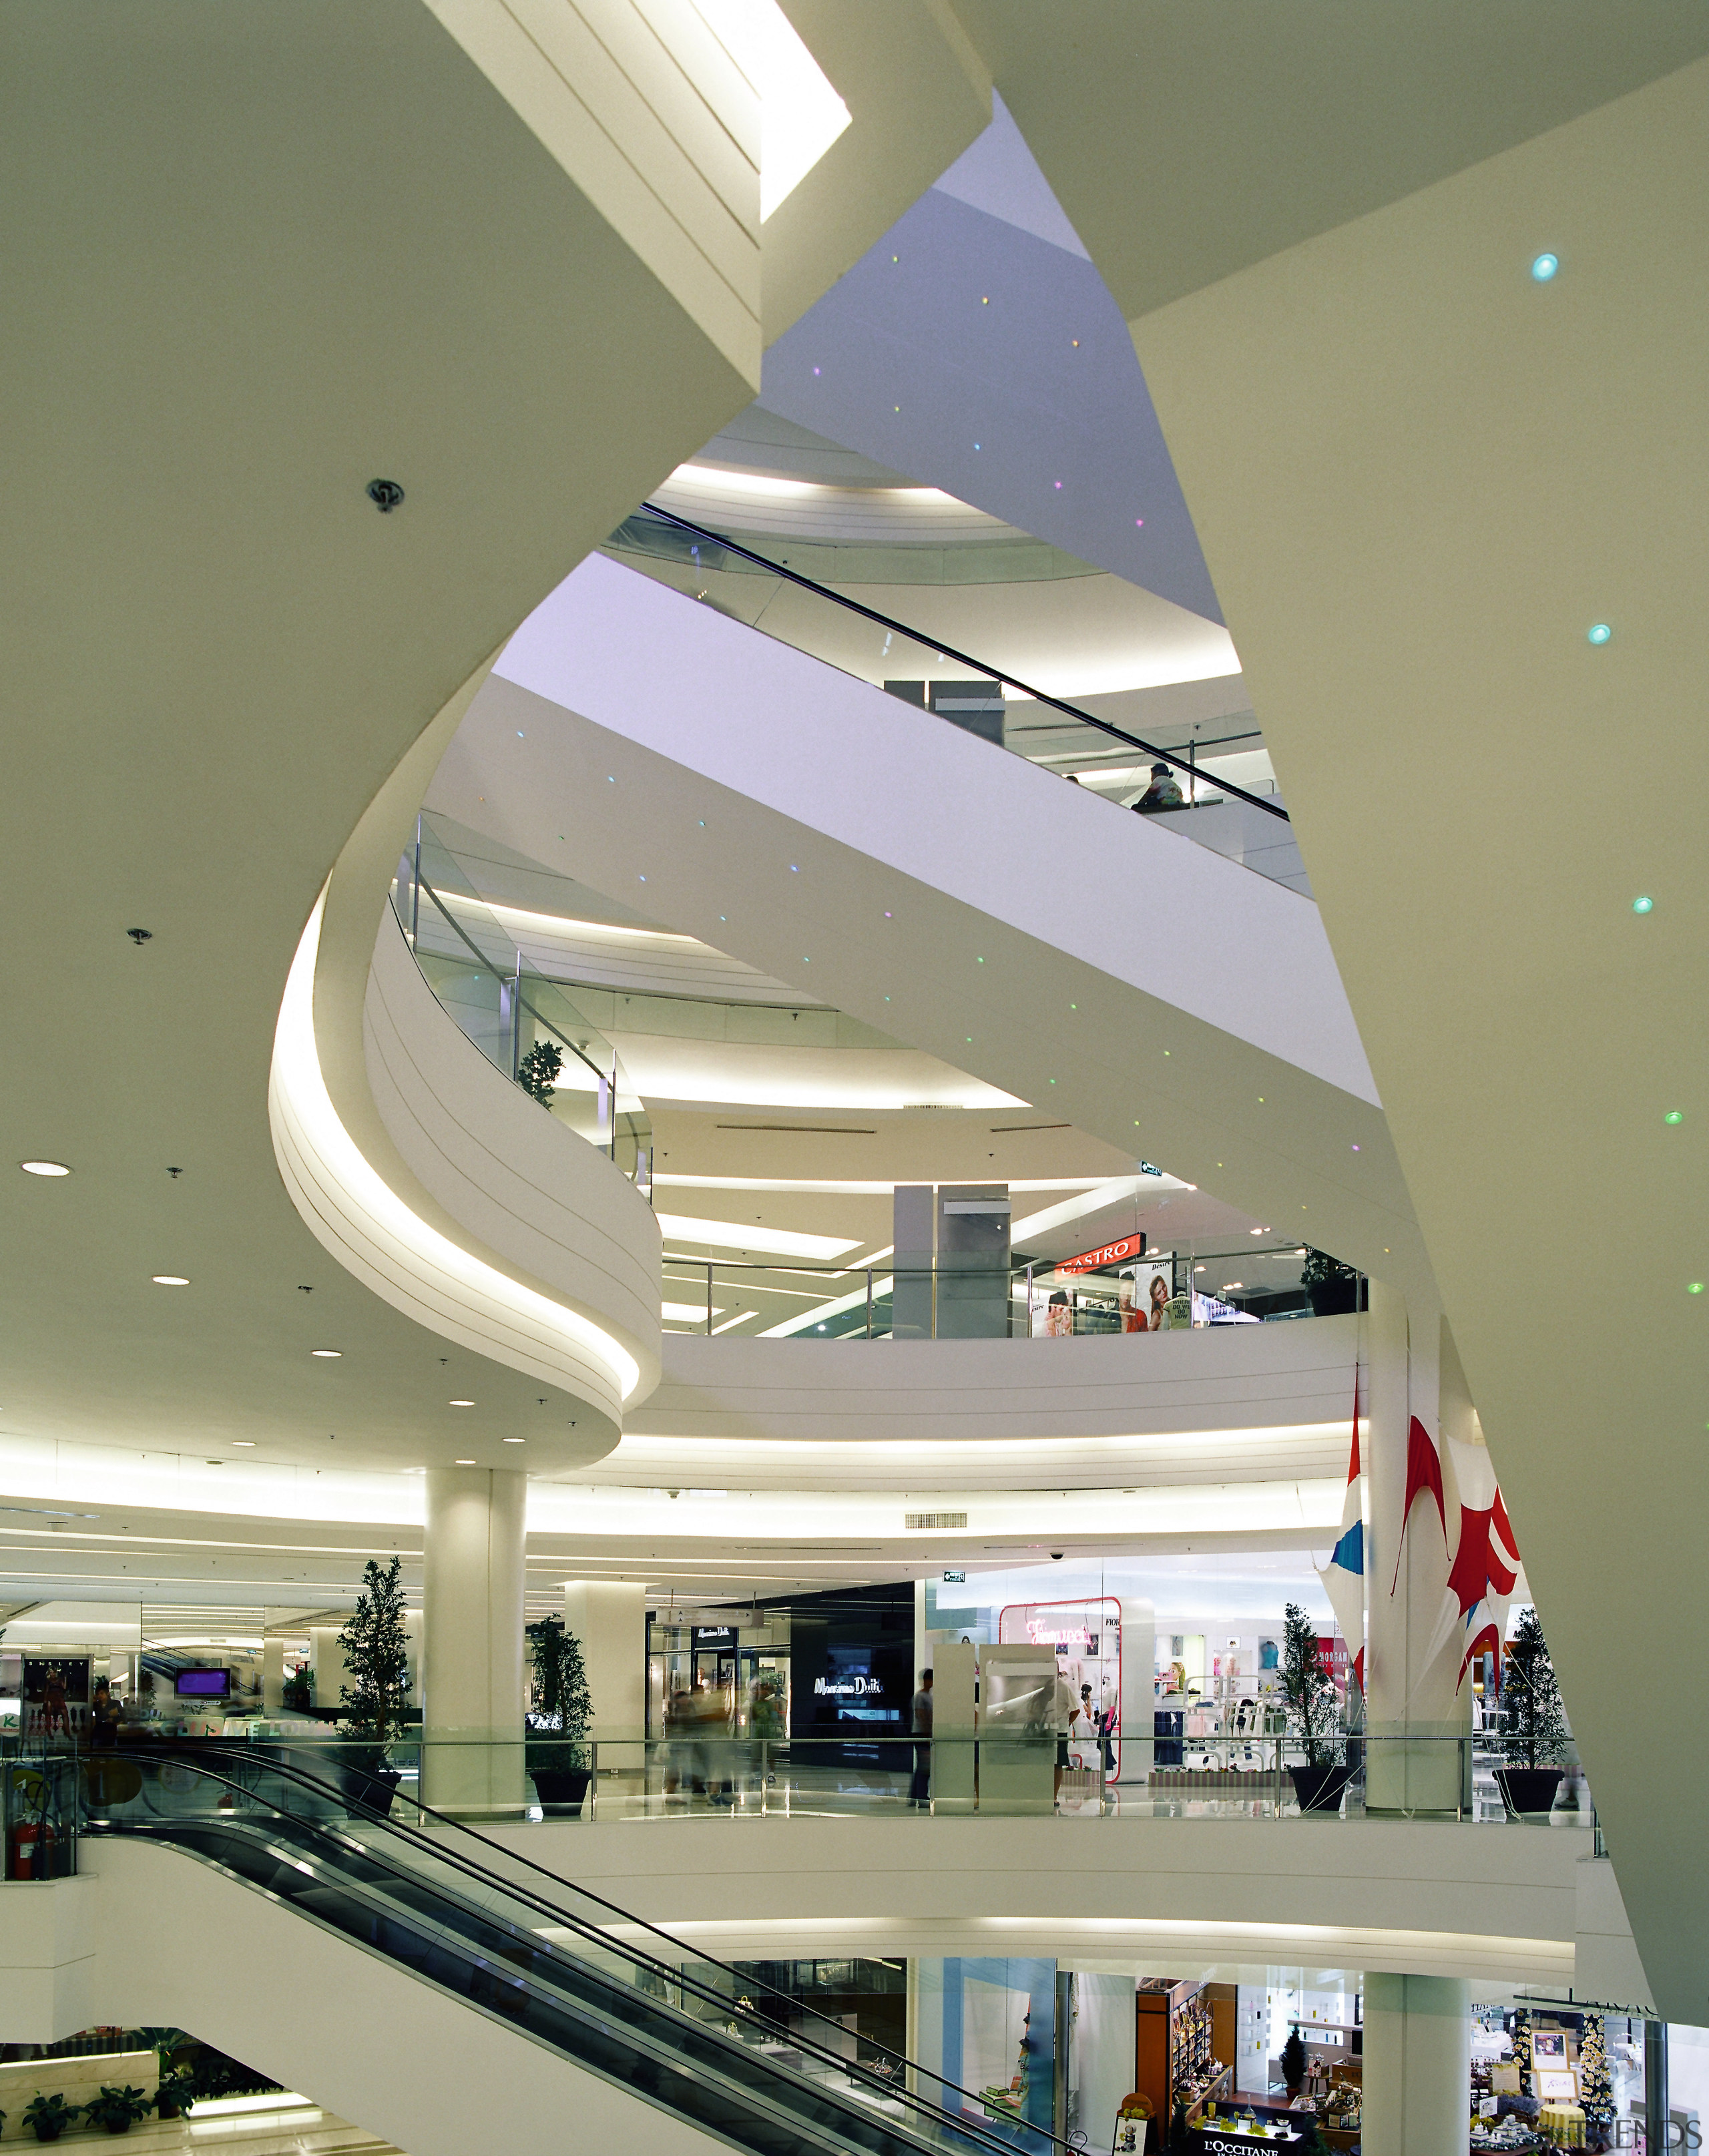 A interior view of the shopping complex. - architecture, ceiling, daylighting, interior design, shopping mall, brown, gray